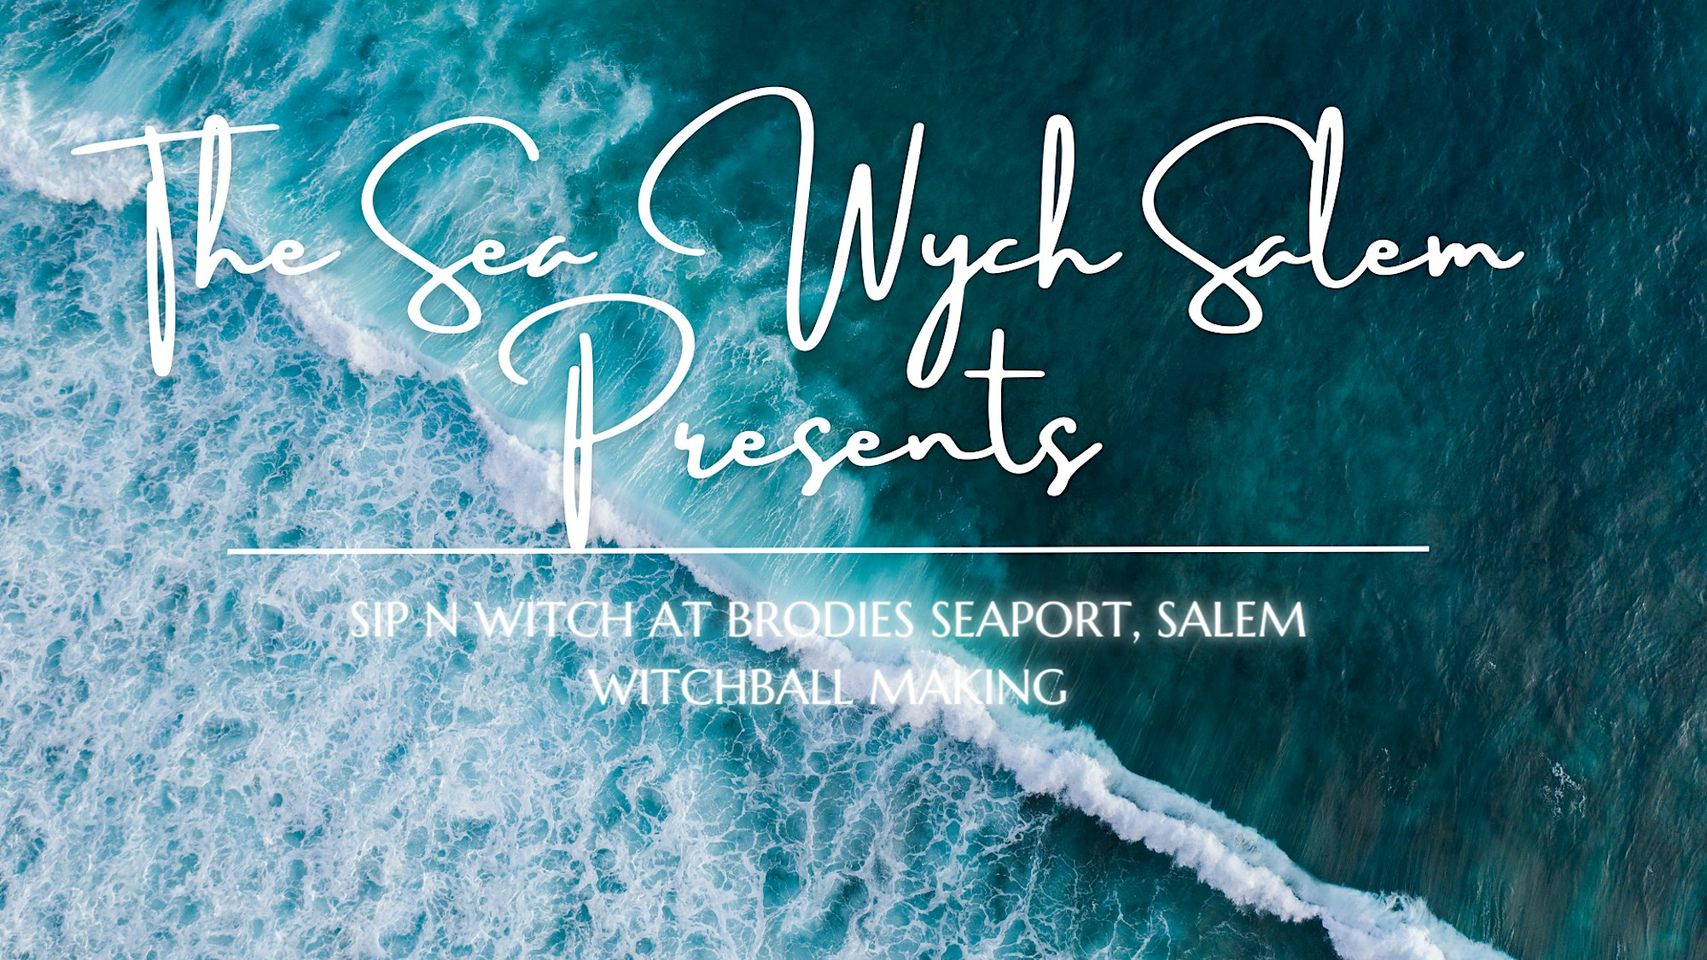 Enjoy the stunning overhead view of ocean waves captioned "Sea Nych Salem presents Sip-N-Witch at Brodies Seaport, where you create your own Salem Witchball.